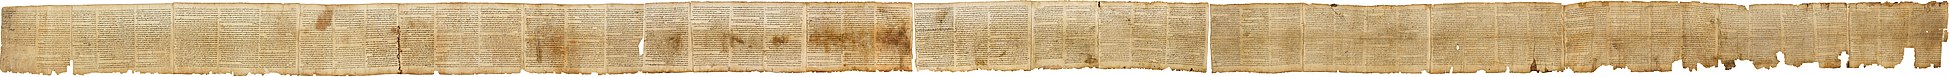 The Great Isaiah Scroll MS A (1QIsa) - Google Art Project